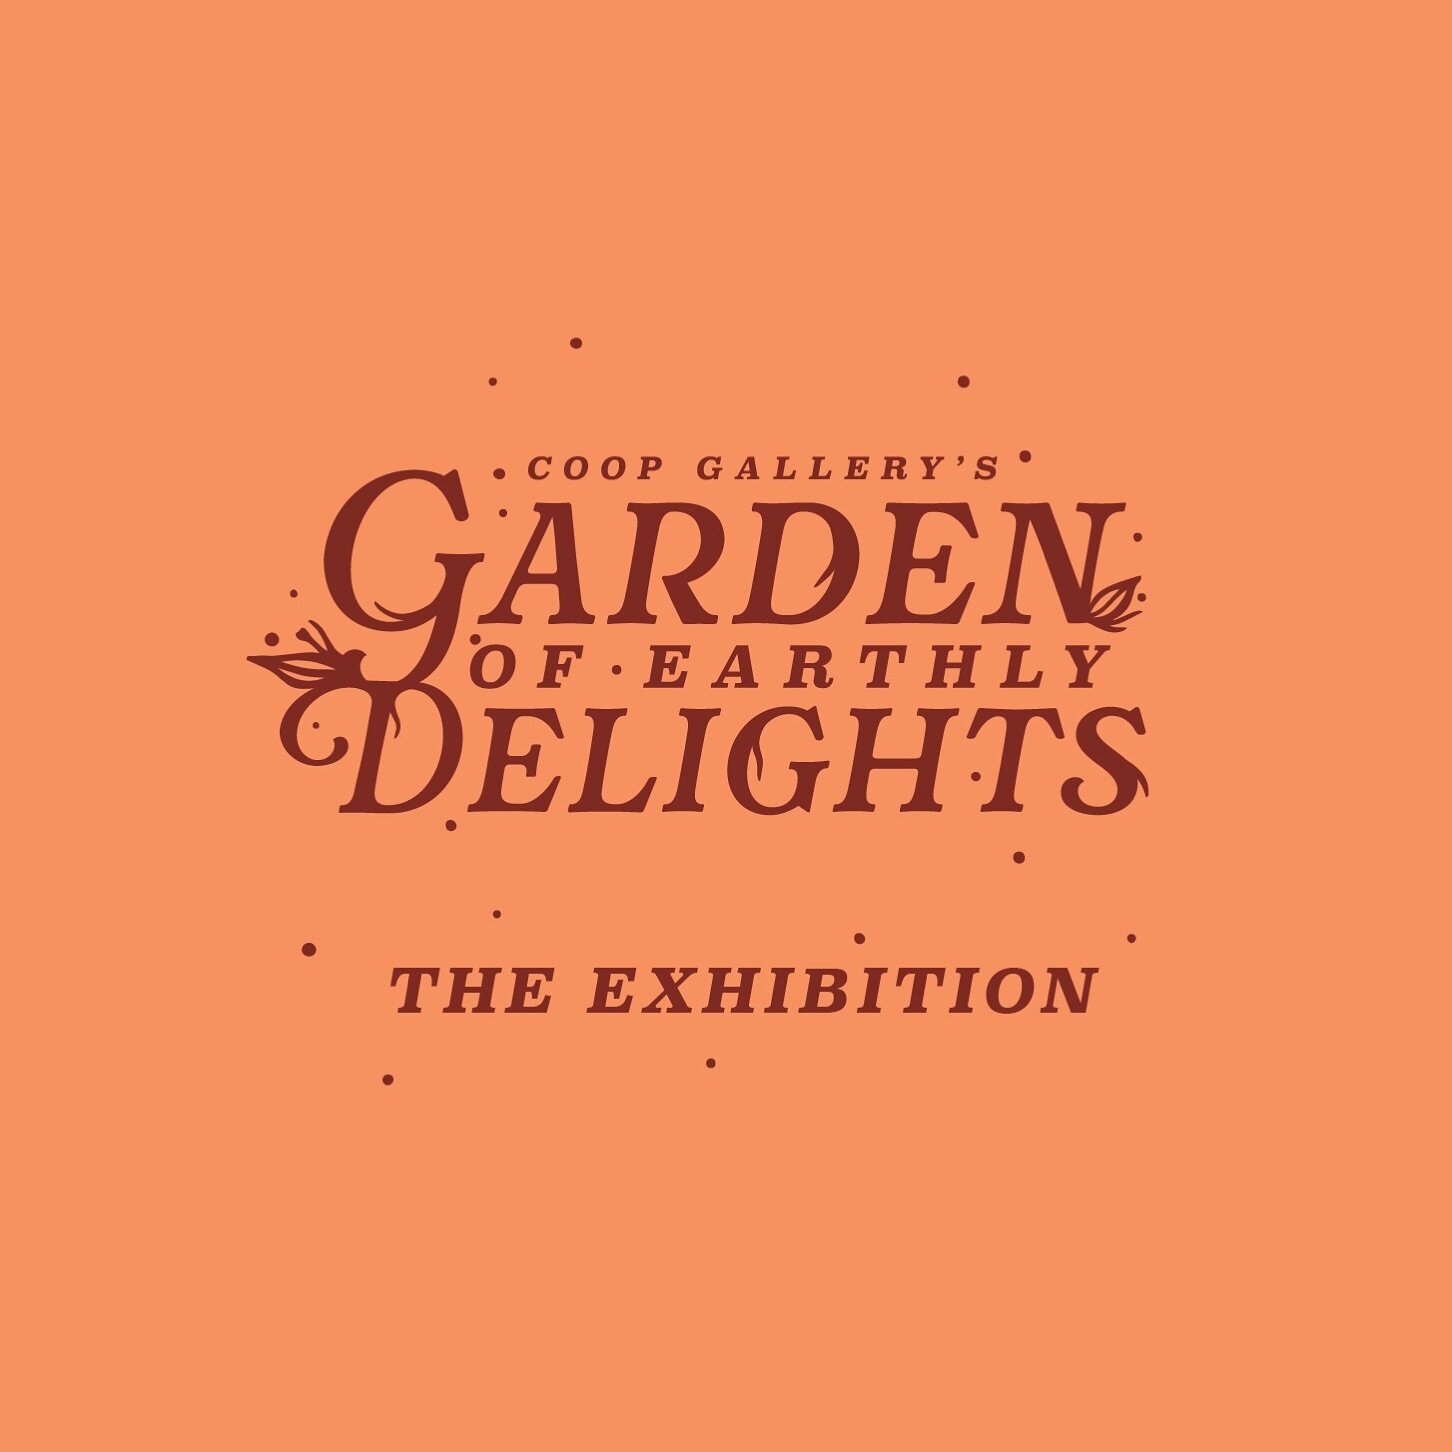 COOP welcomes submissions to Garden of Earthly Delights: The Exhibition, our May group show and spring party. Artworks should be no greater than 24&rdquo; in size and inspired by gardens and nature. Our party will occur on Friday, May 3. Selected art